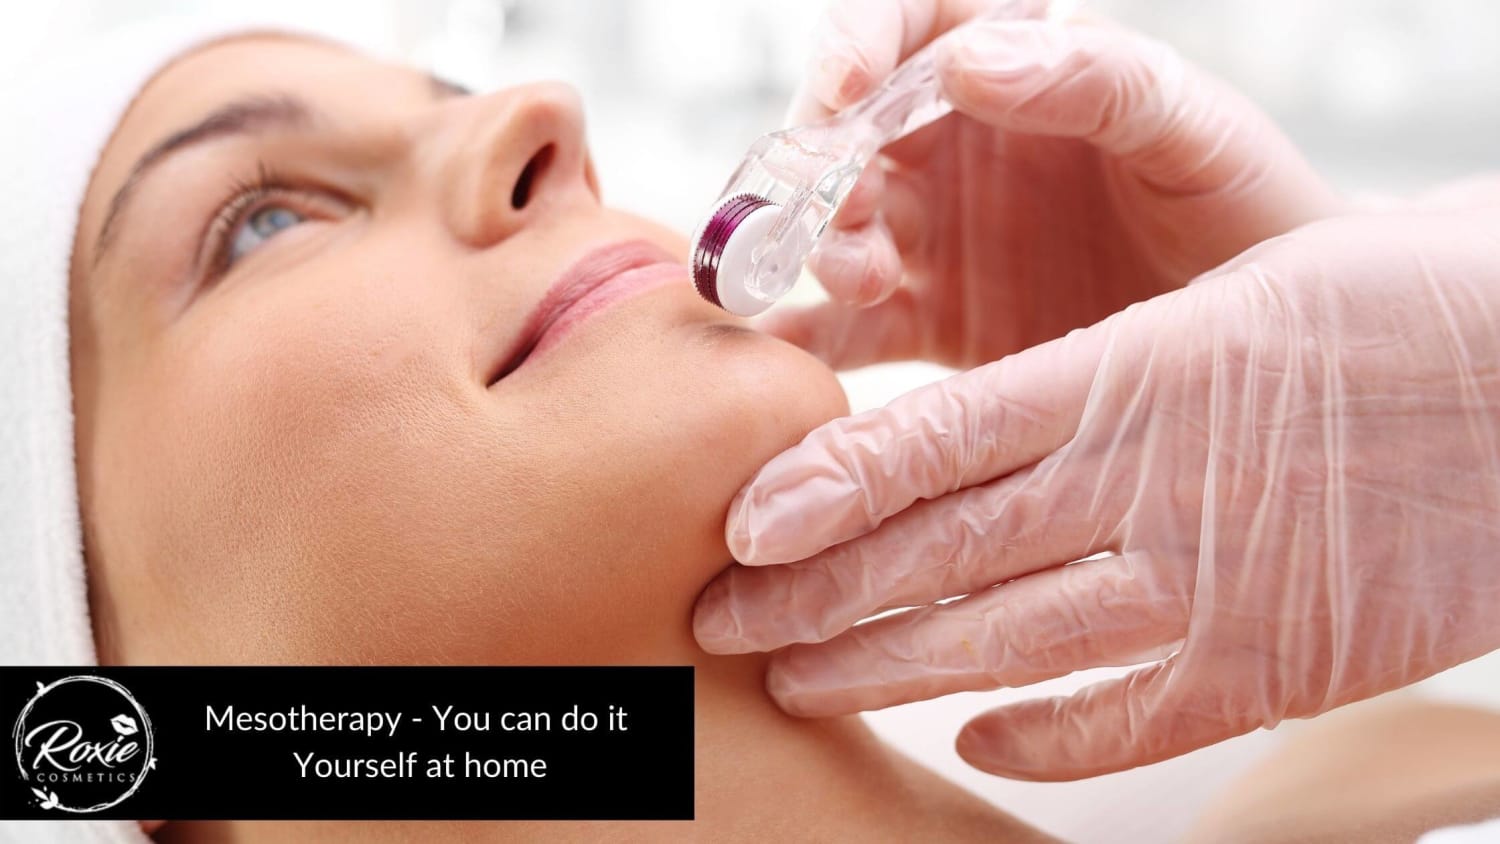 Mesotherapy - you can do it by yourself at home!